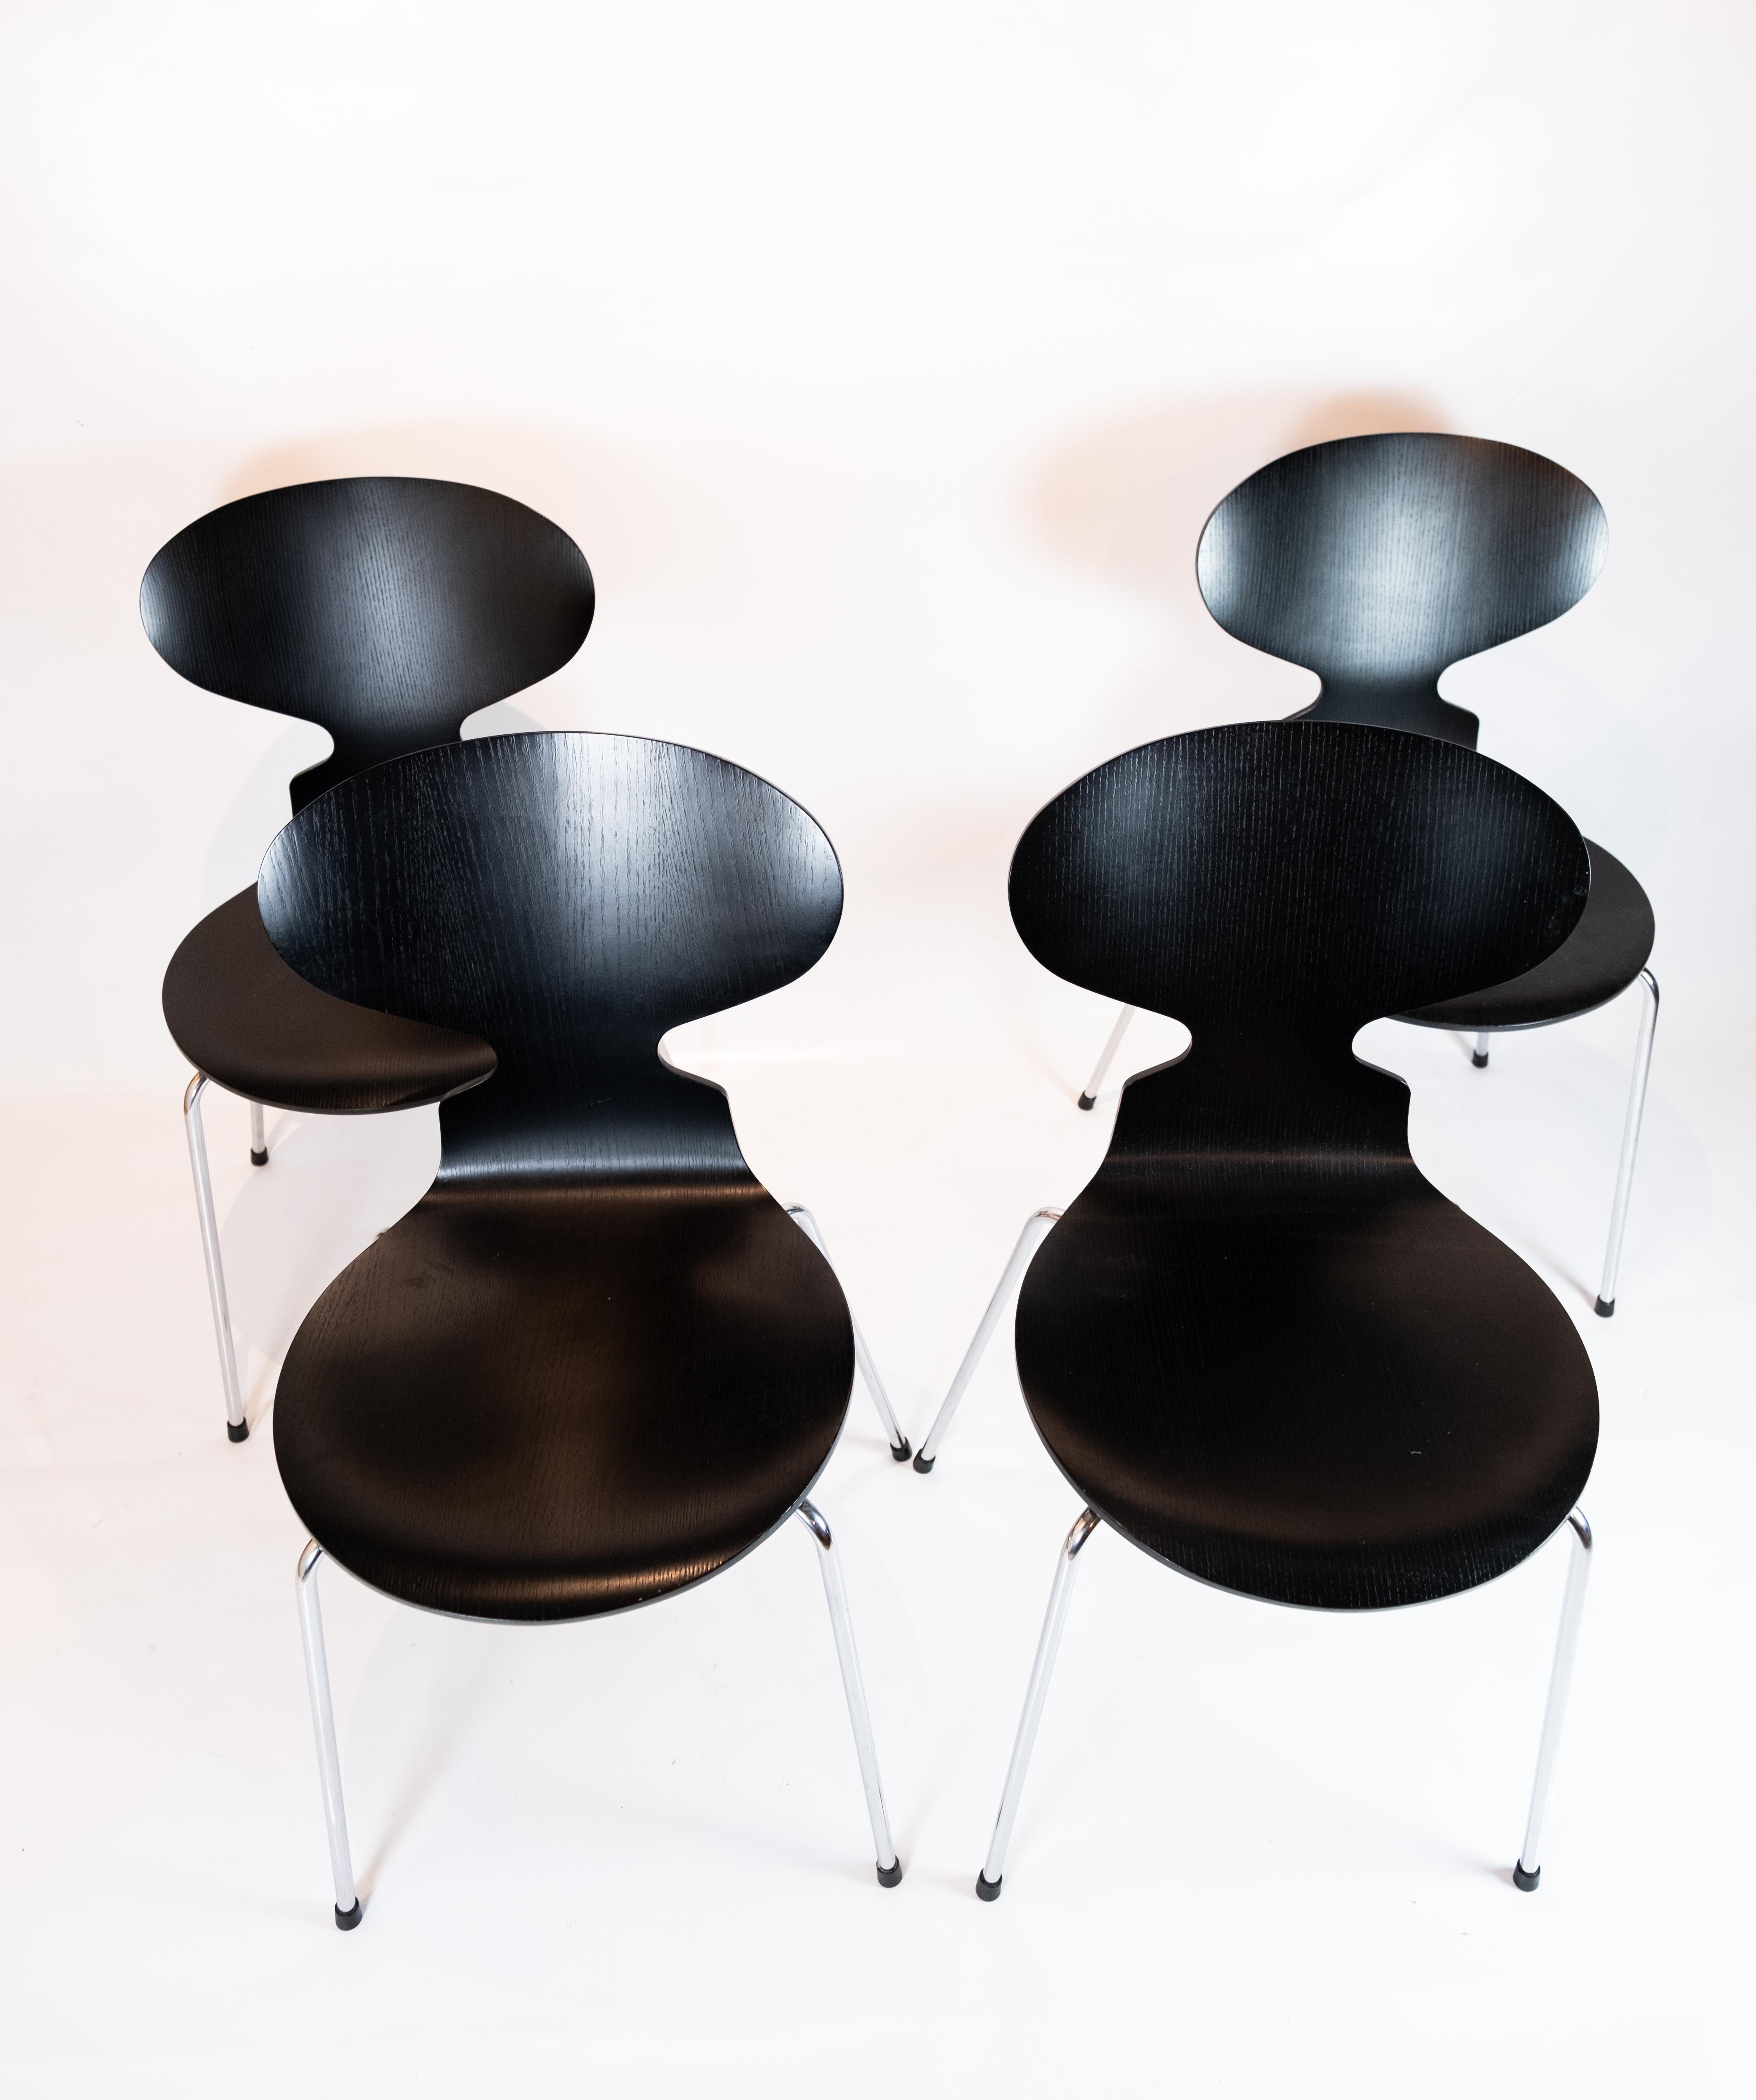 
This set of four iconic Ant chairs, designed by the legendary Arne Jacobsen in 1952, embodies the epitome of Danish design excellence. Manufactured by Fritz Hansen in 2006, these chairs seamlessly blend timeless aesthetics with contemporary